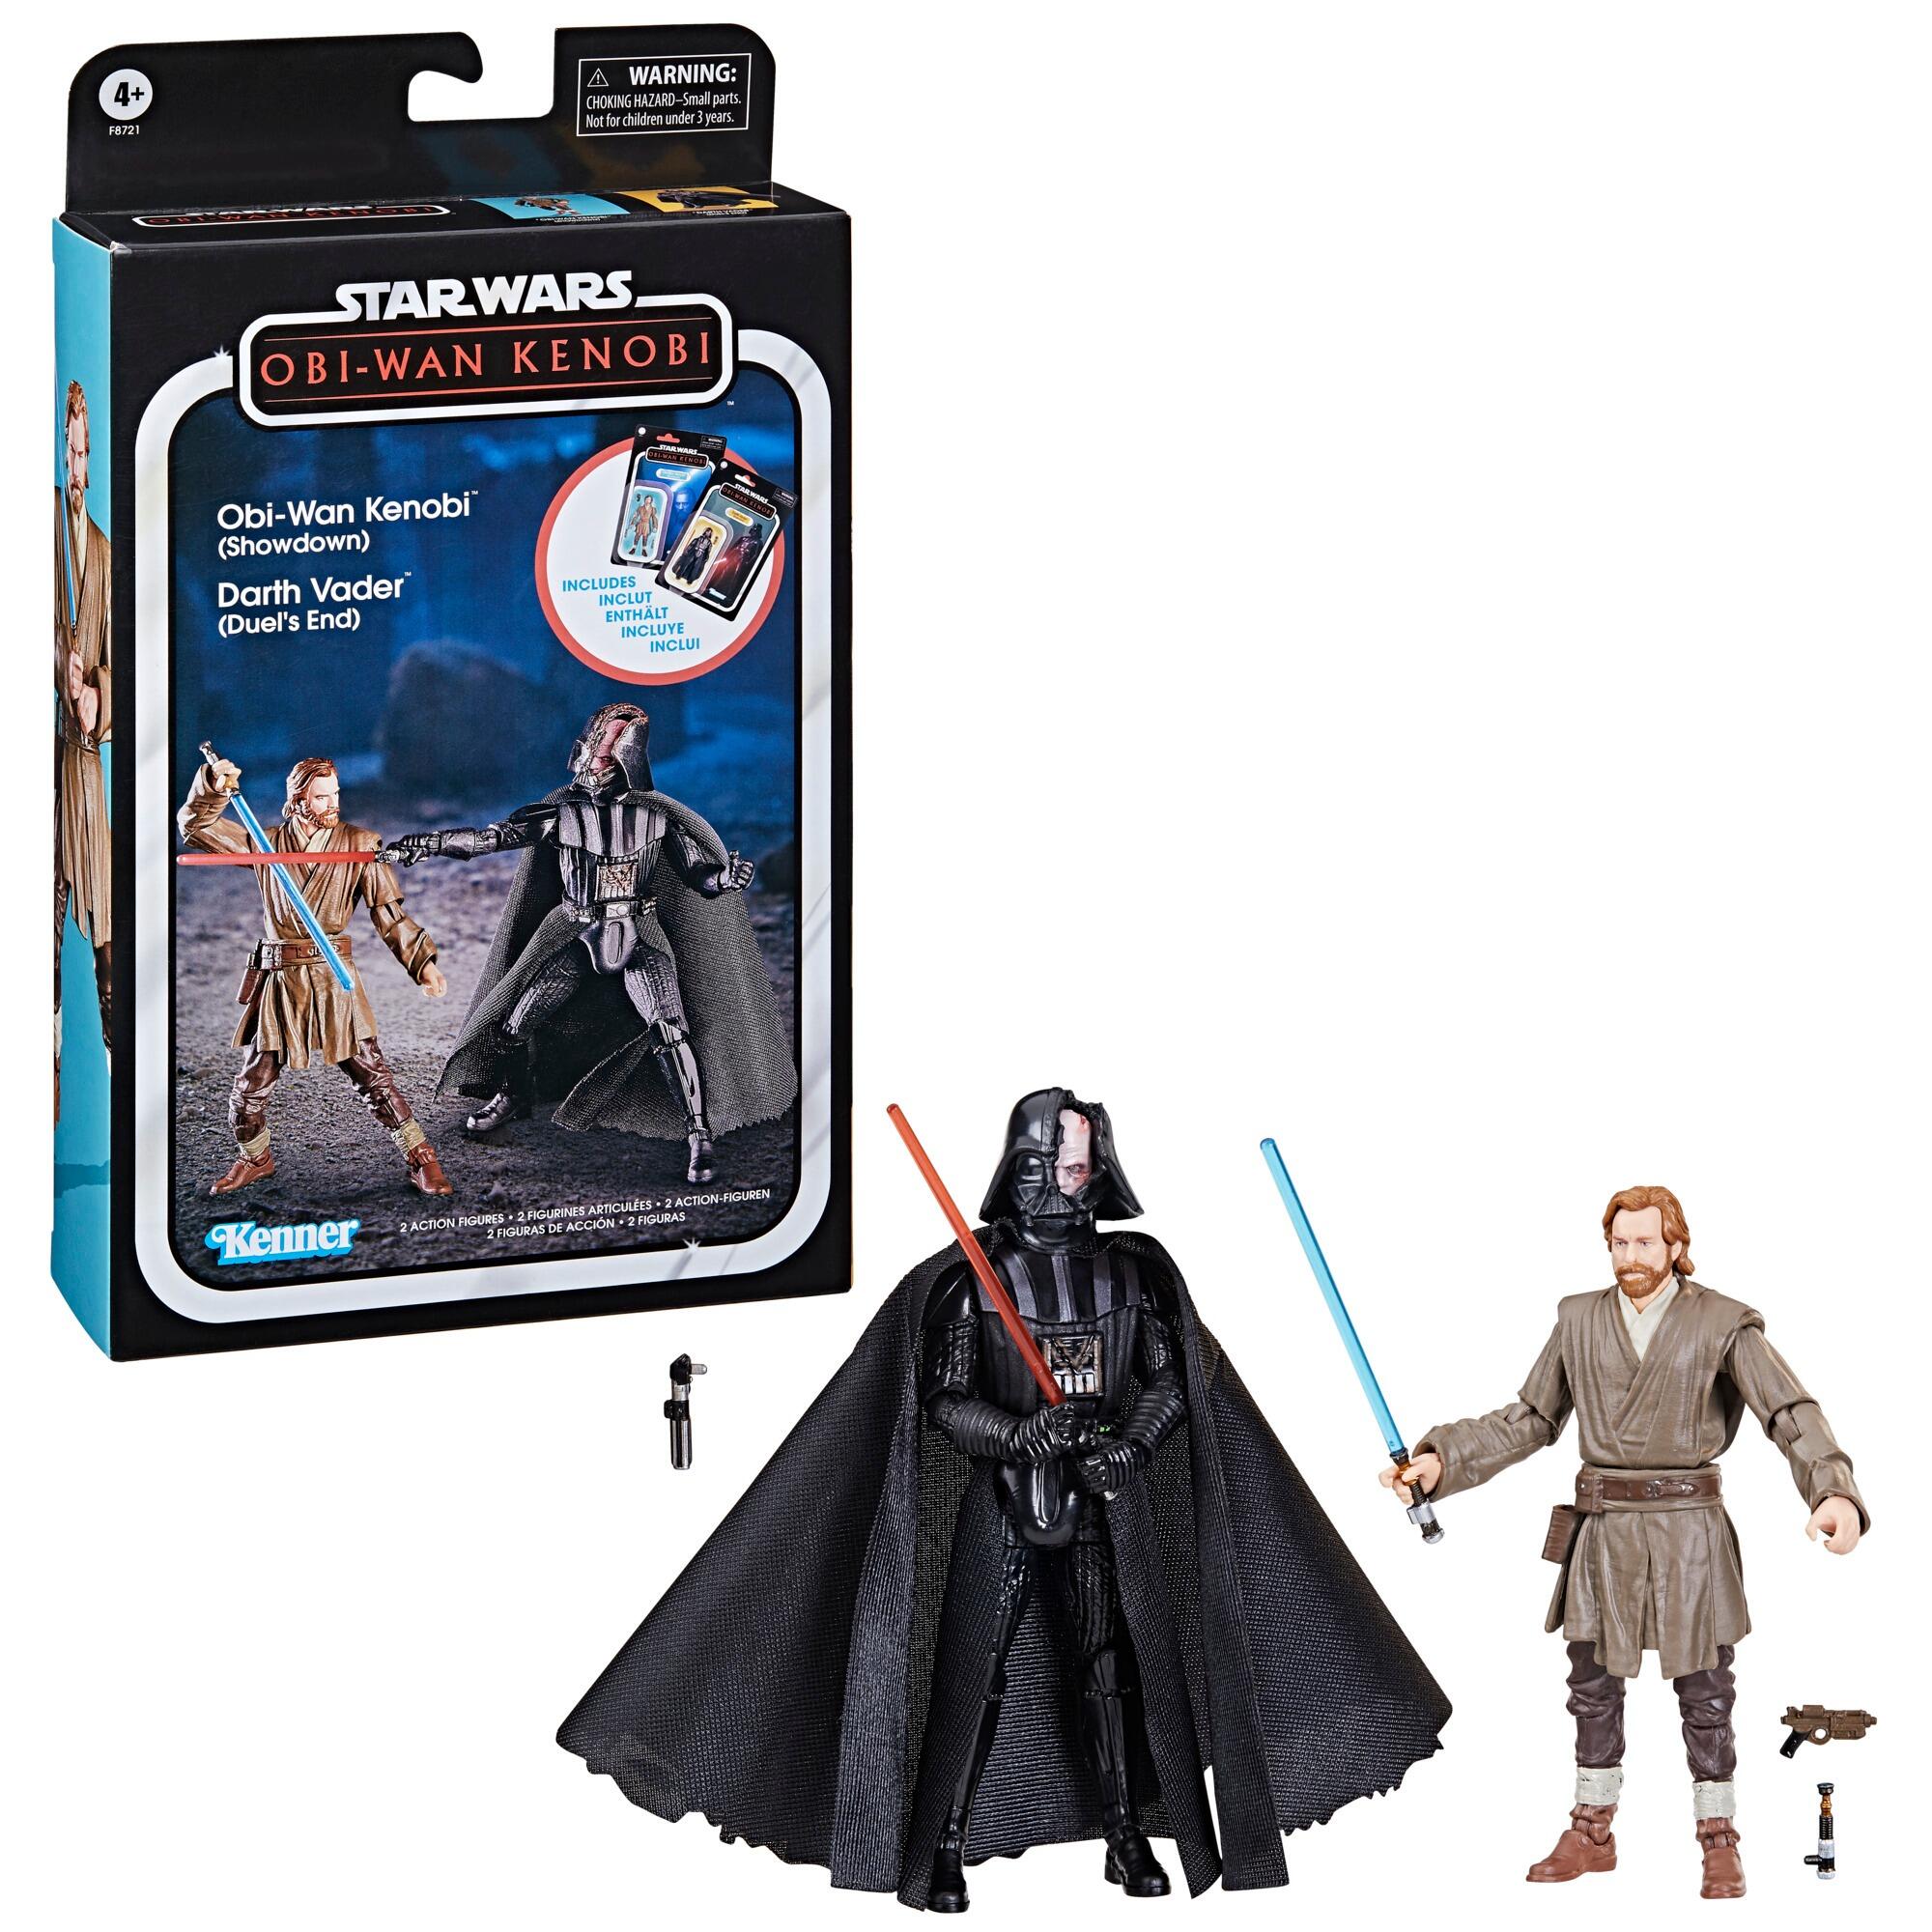  STAR WARS The Vintage Collection Darth Vader (The Dark Times)  Toy, 3.75-Inch-Scale OBI-Wan Kenobi Figure, Toys Kids Ages 4 and Up : Toys  & Games